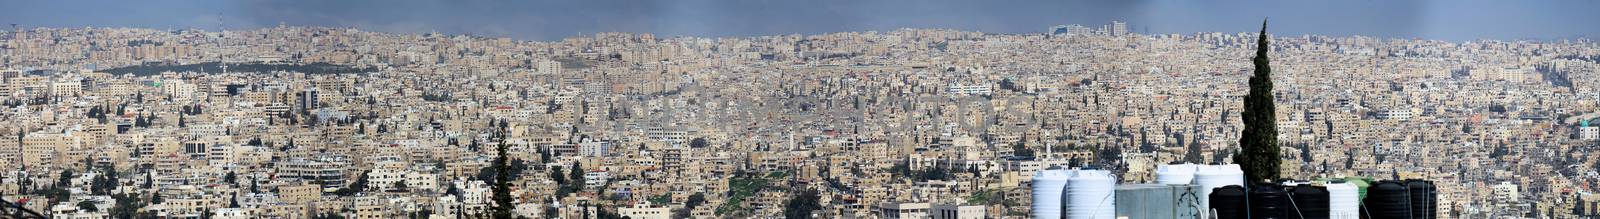 High resolution panoramic view from the not very nice development of Amman, the capital of the Kingdom of Jordan, middle east